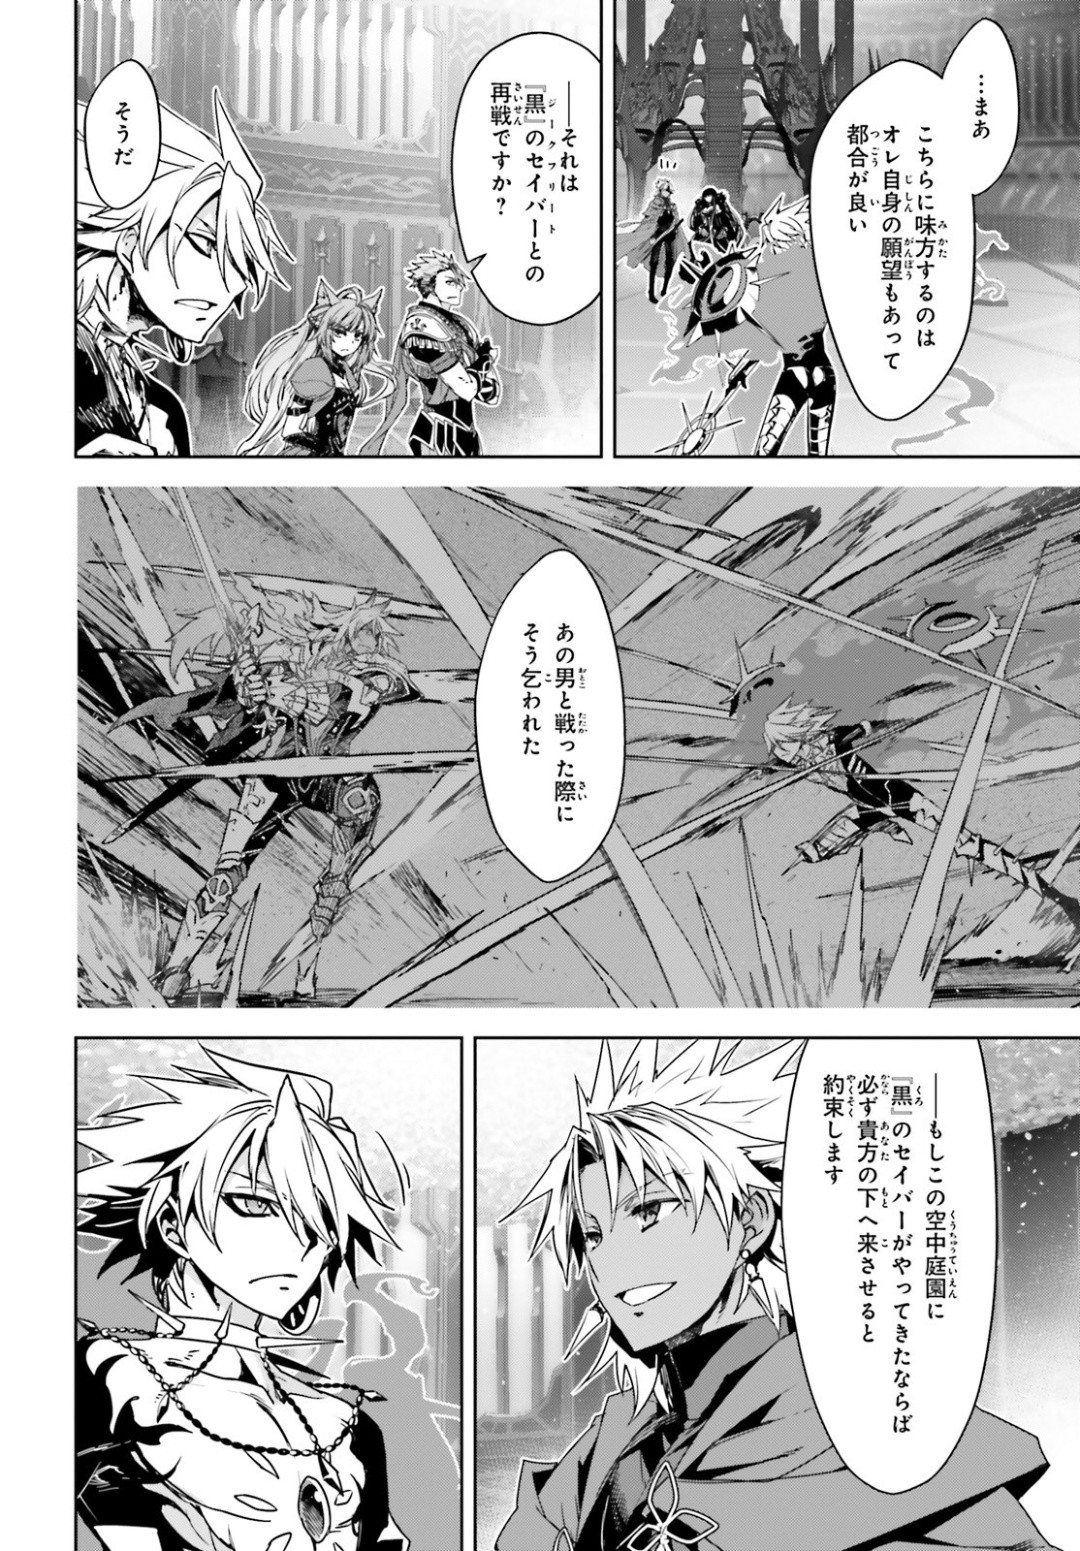 Fate-Apocrypha - Chapter 38 - Page 15